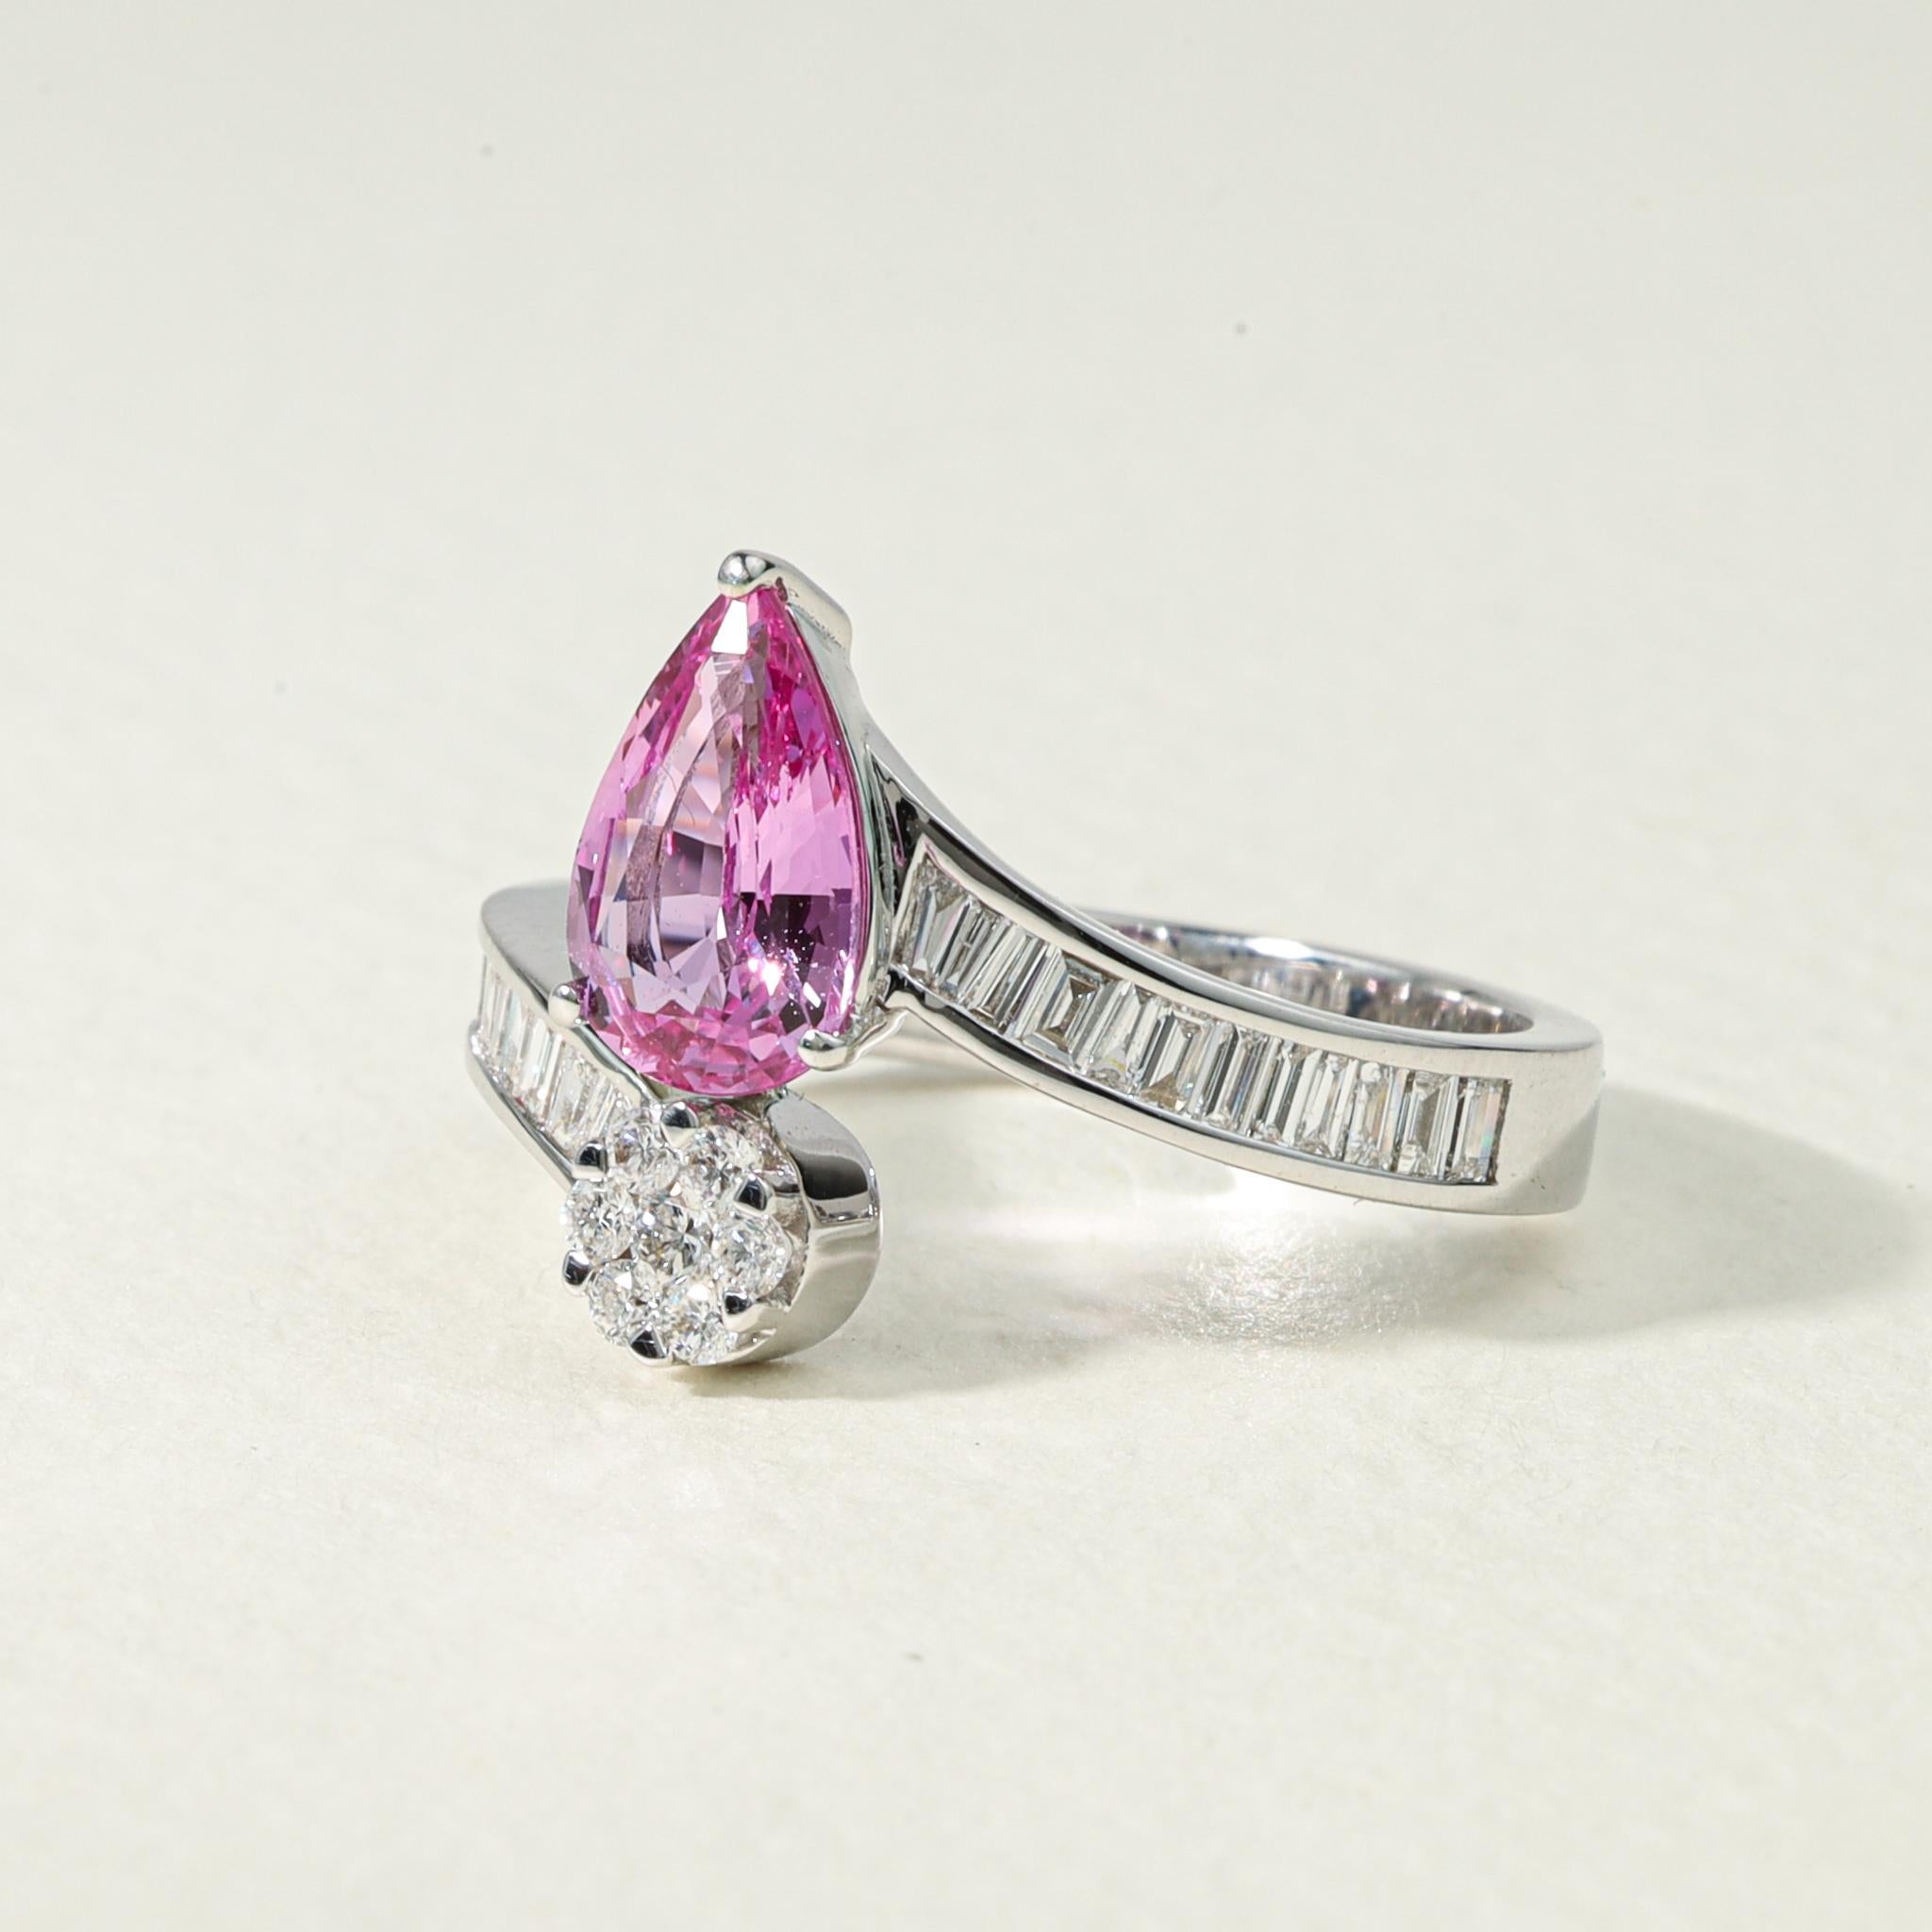 Taille poire 1.5 Carat Pear Pink Sapphire Diamond Cocktail Engagement Ring in 18k White Gold en vente